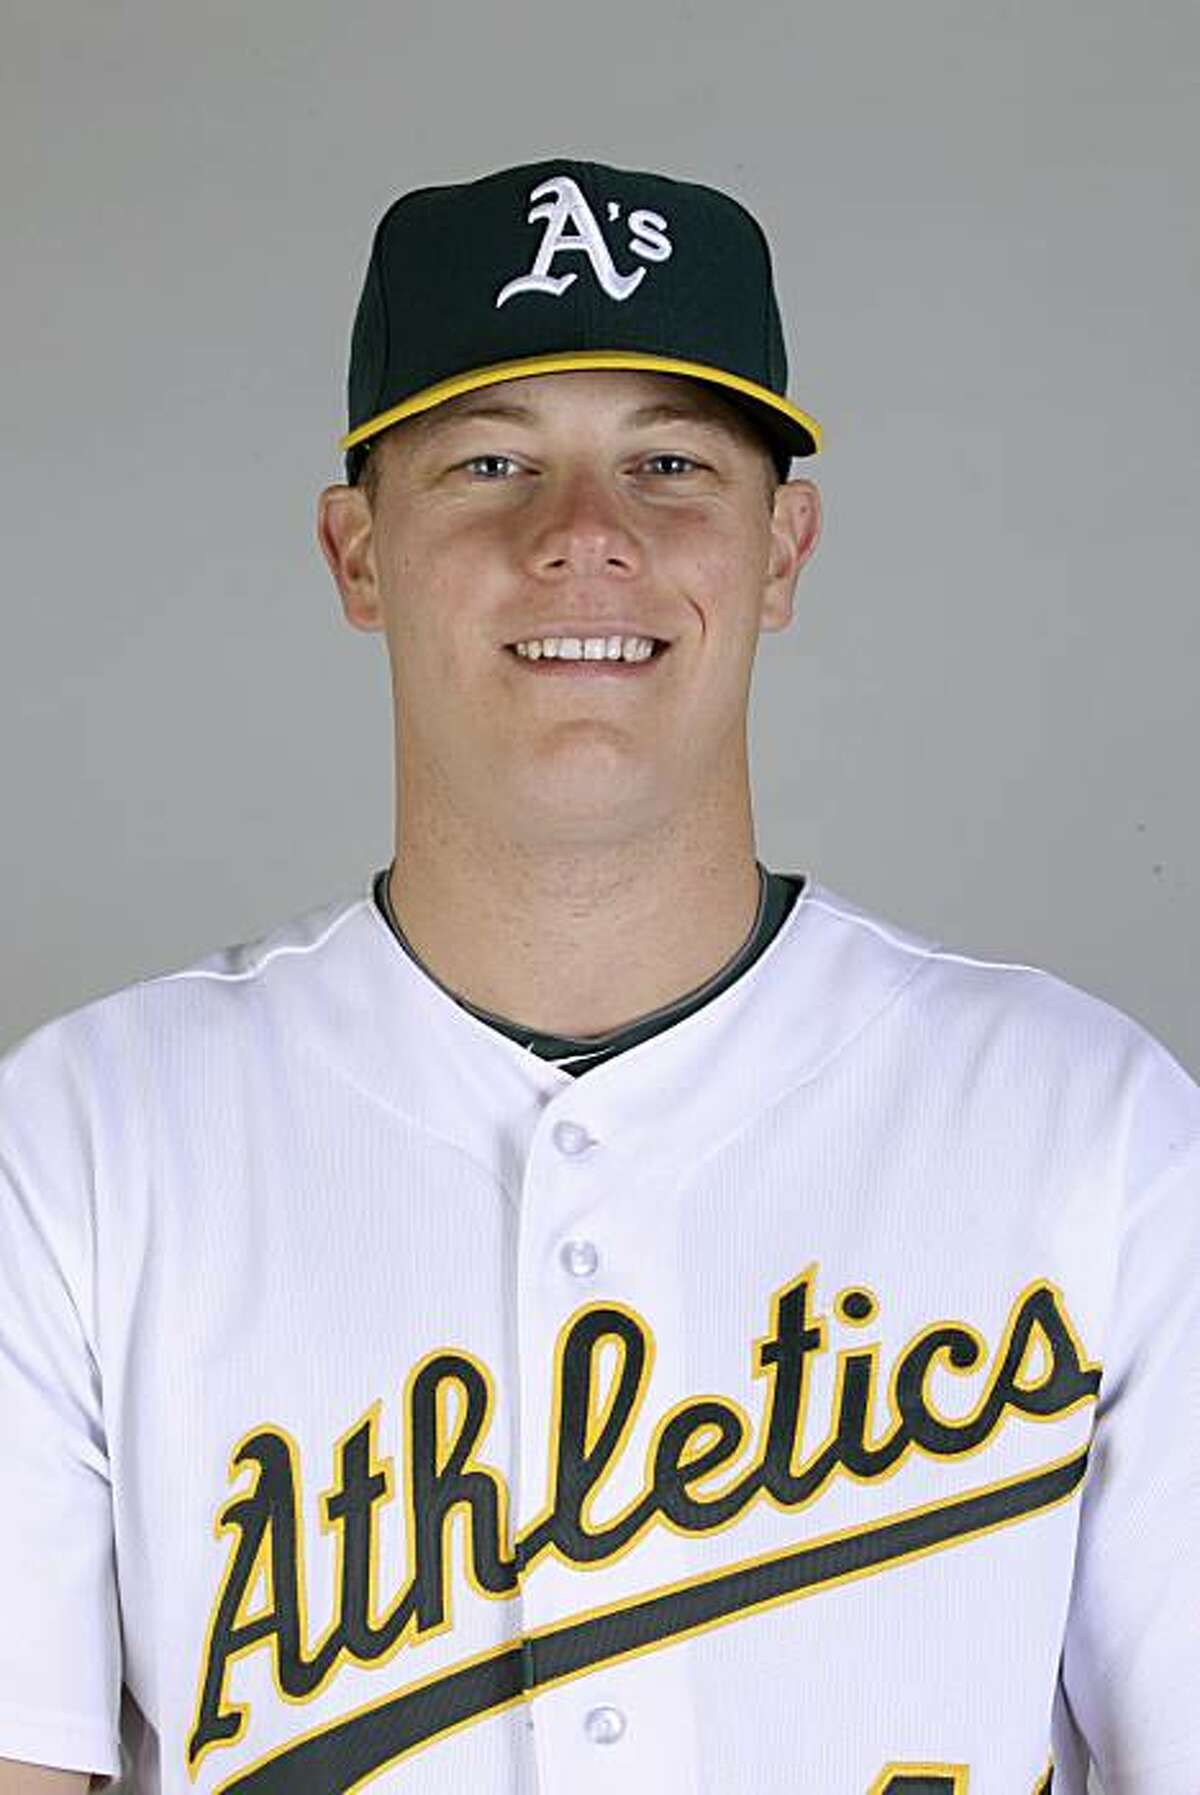 This is a 2011 photo of Andrew Bailey of the Oakland Athletics baseball team. This image reflects the Oakland Athletics active roster as of Thursday, Feb. 24, 2011 when this image was taken.